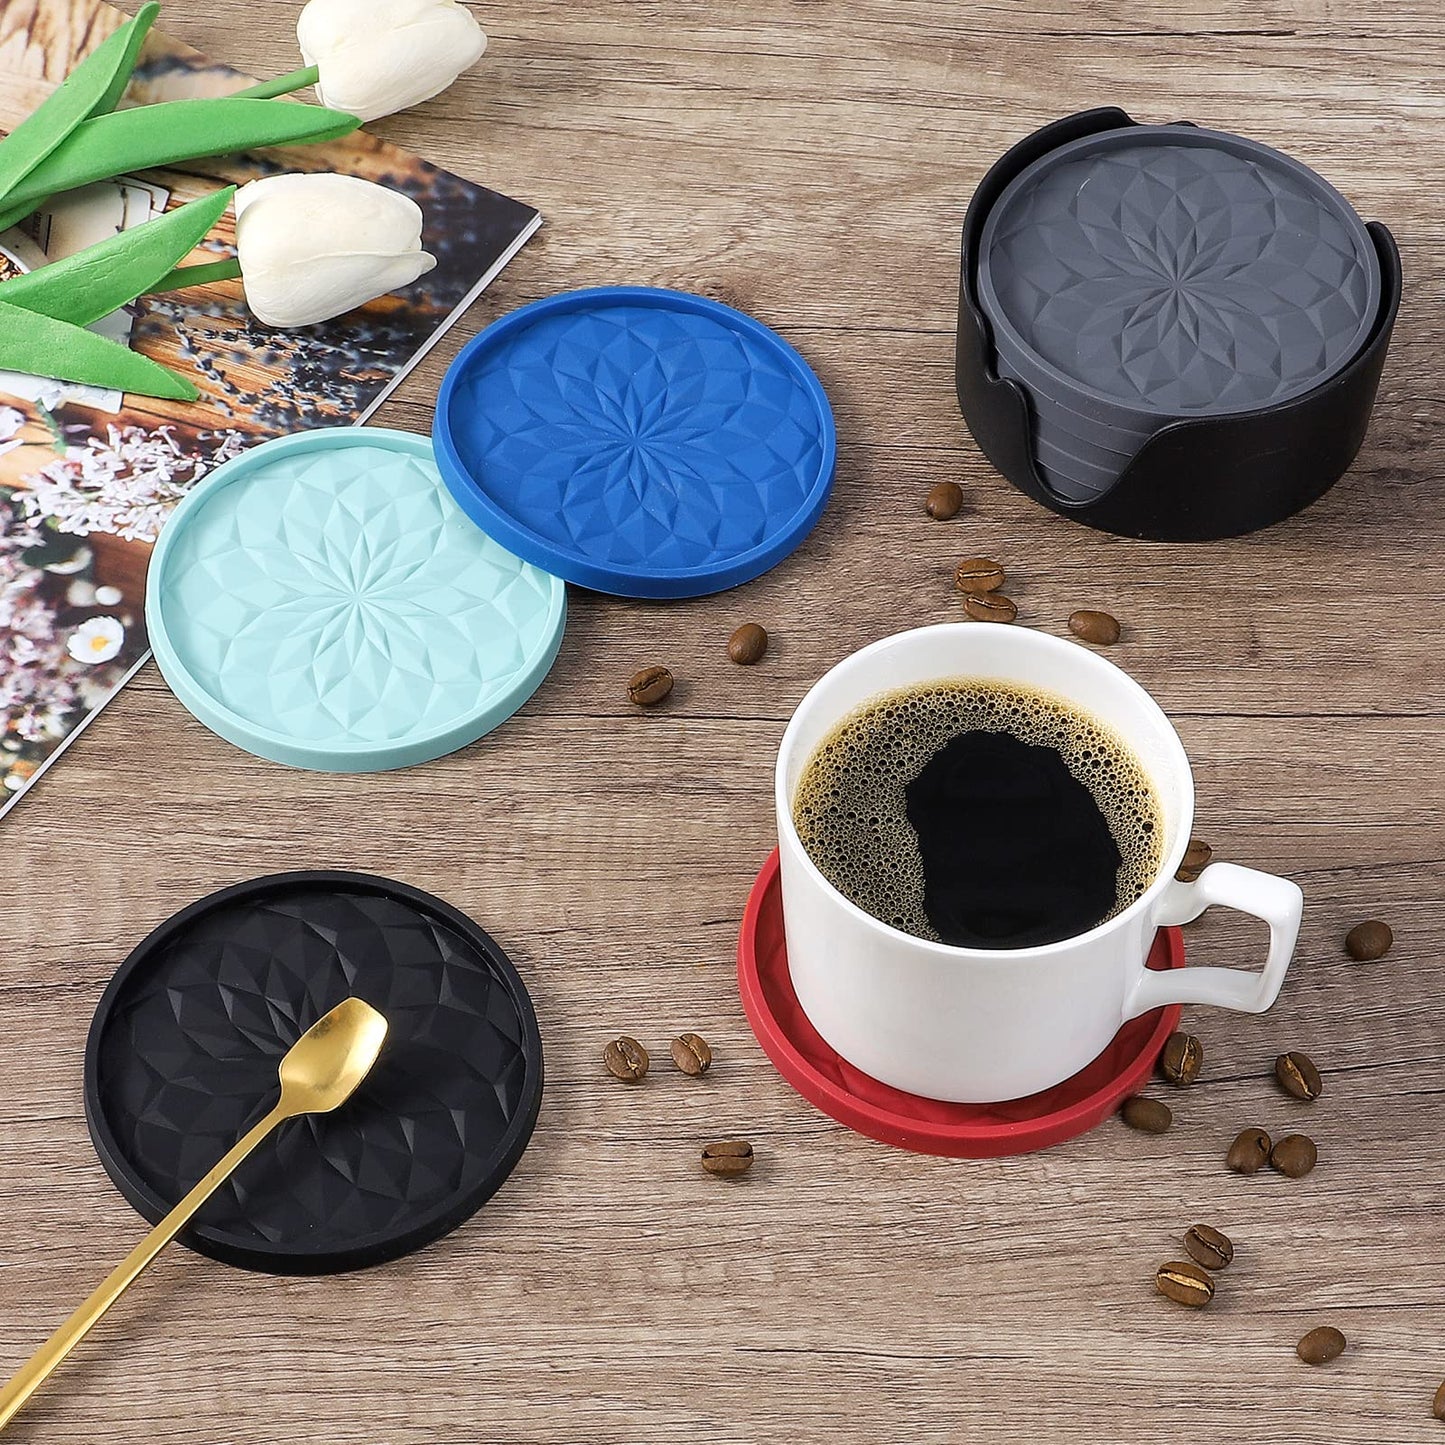 ME.FAN Silicone Coasters [6 Pack] Coasters with Holder - Drinking Coasters - Cup Mat for Drinks - Live for Hot or Cold Drink Thickened, Non-Slip, Non-stick, Deep Tray Black